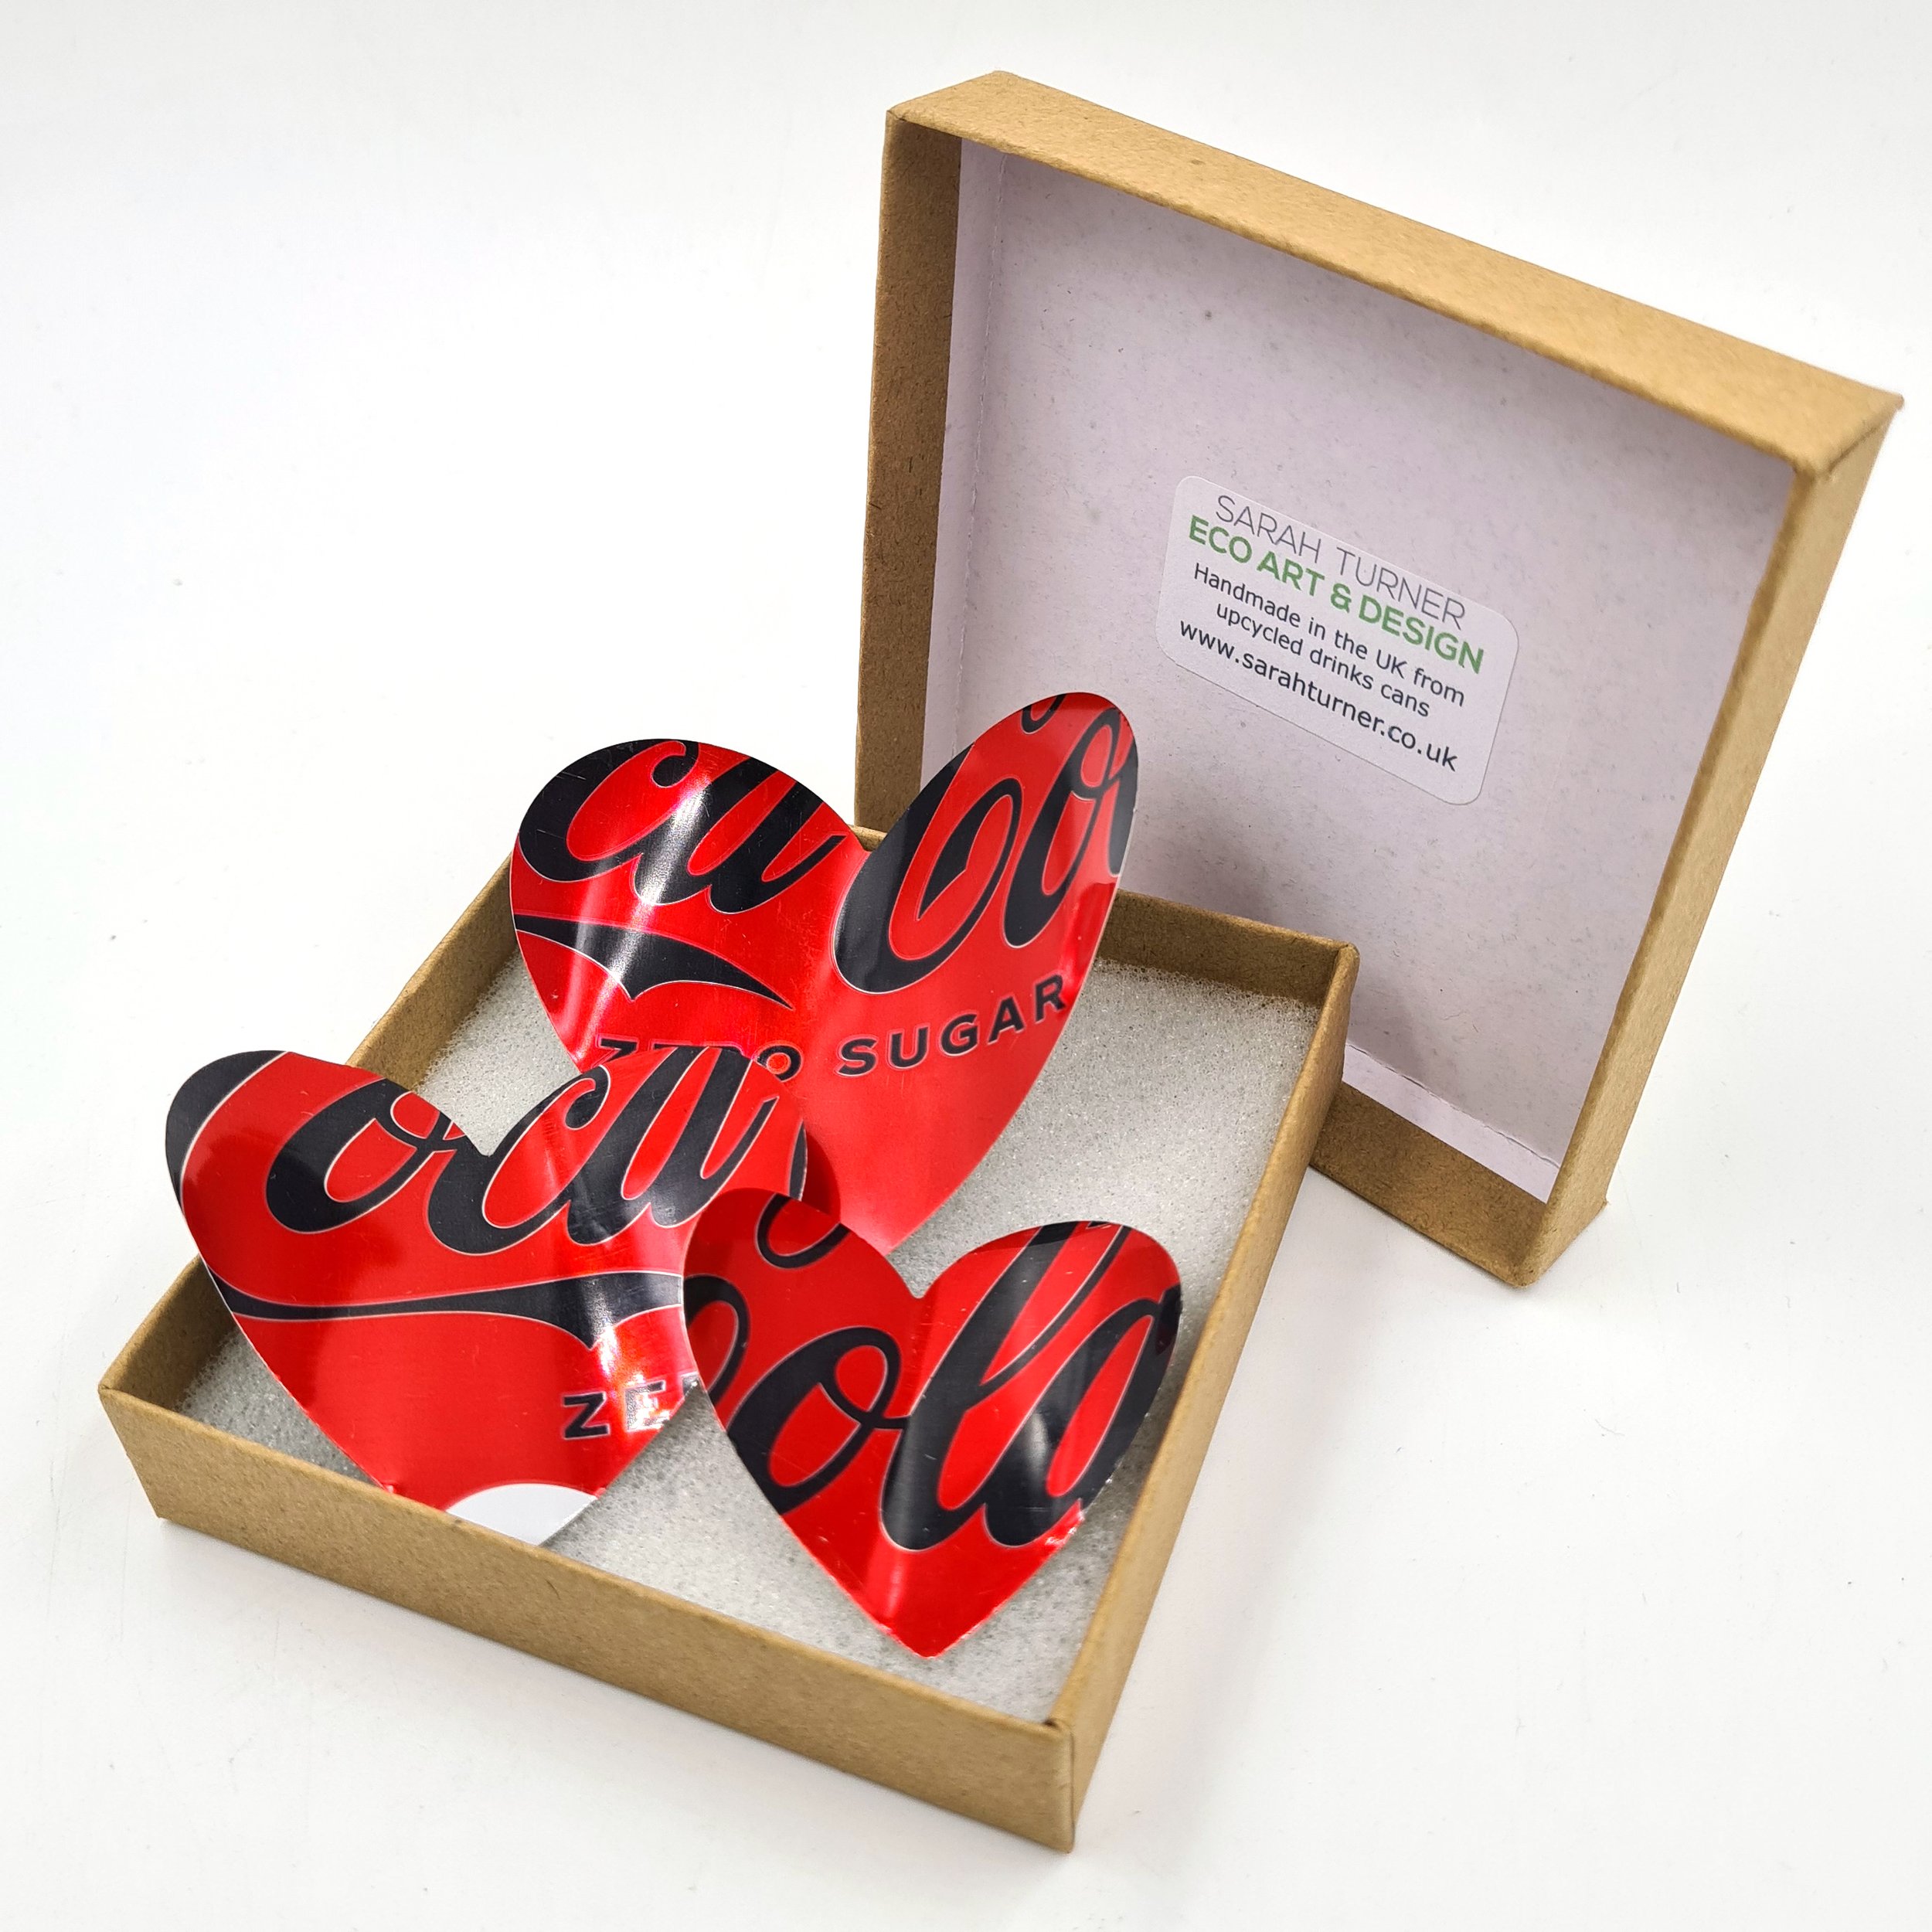 Coke Zero reycled can magnets Hearts 3 with gift box.jpg